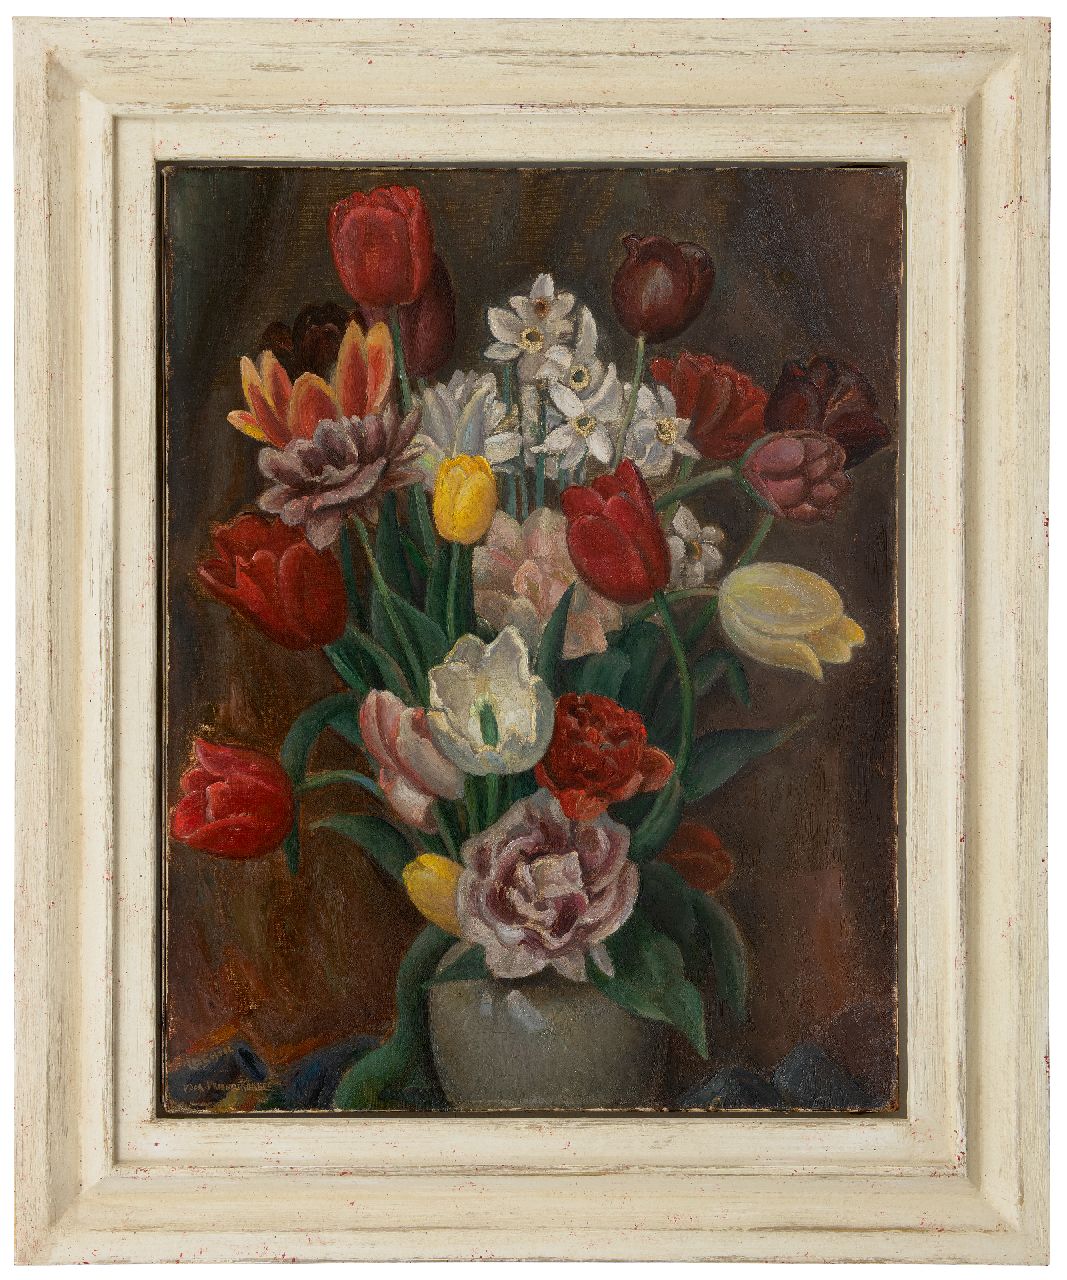 Gestel L.  | Leendert 'Leo' Gestel | Paintings offered for sale | Flower still life, oil on canvas 70.6 x 55.3 cm, signed l.l. and dated 1926 on the reverse